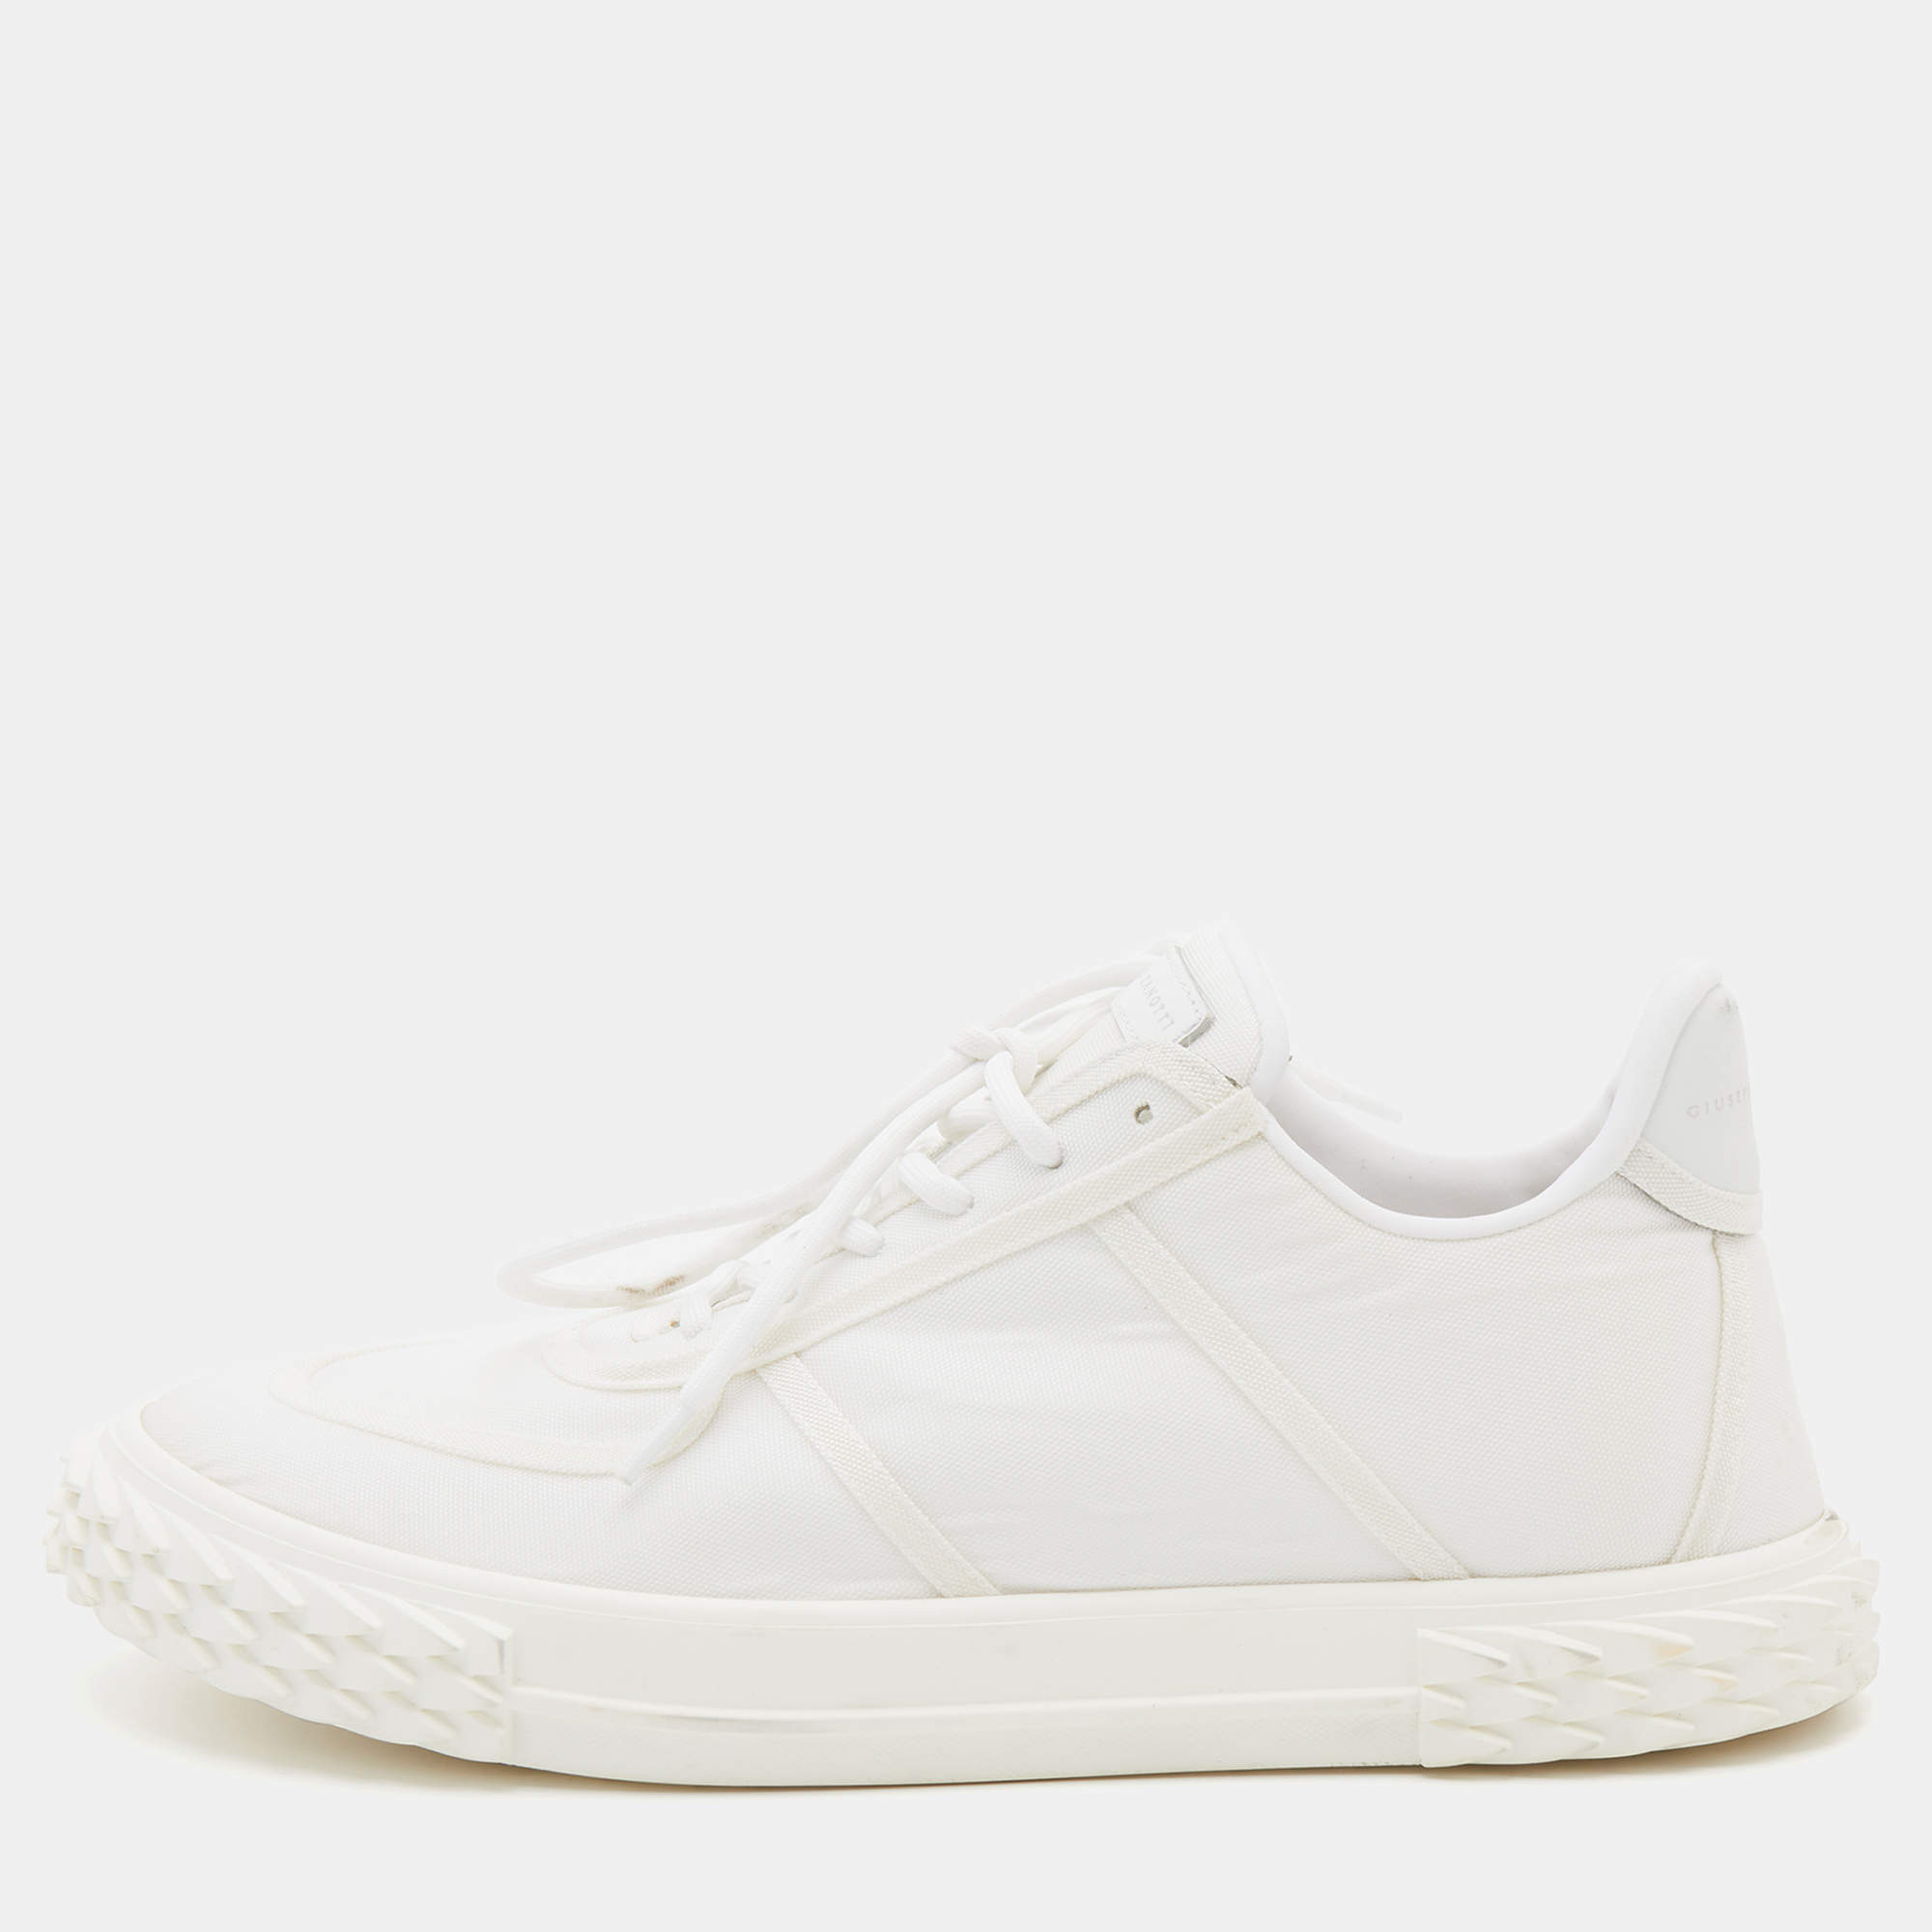 Giuseppe Zanotti White Fabric and Leather Low Top Sneakers Size 42.5